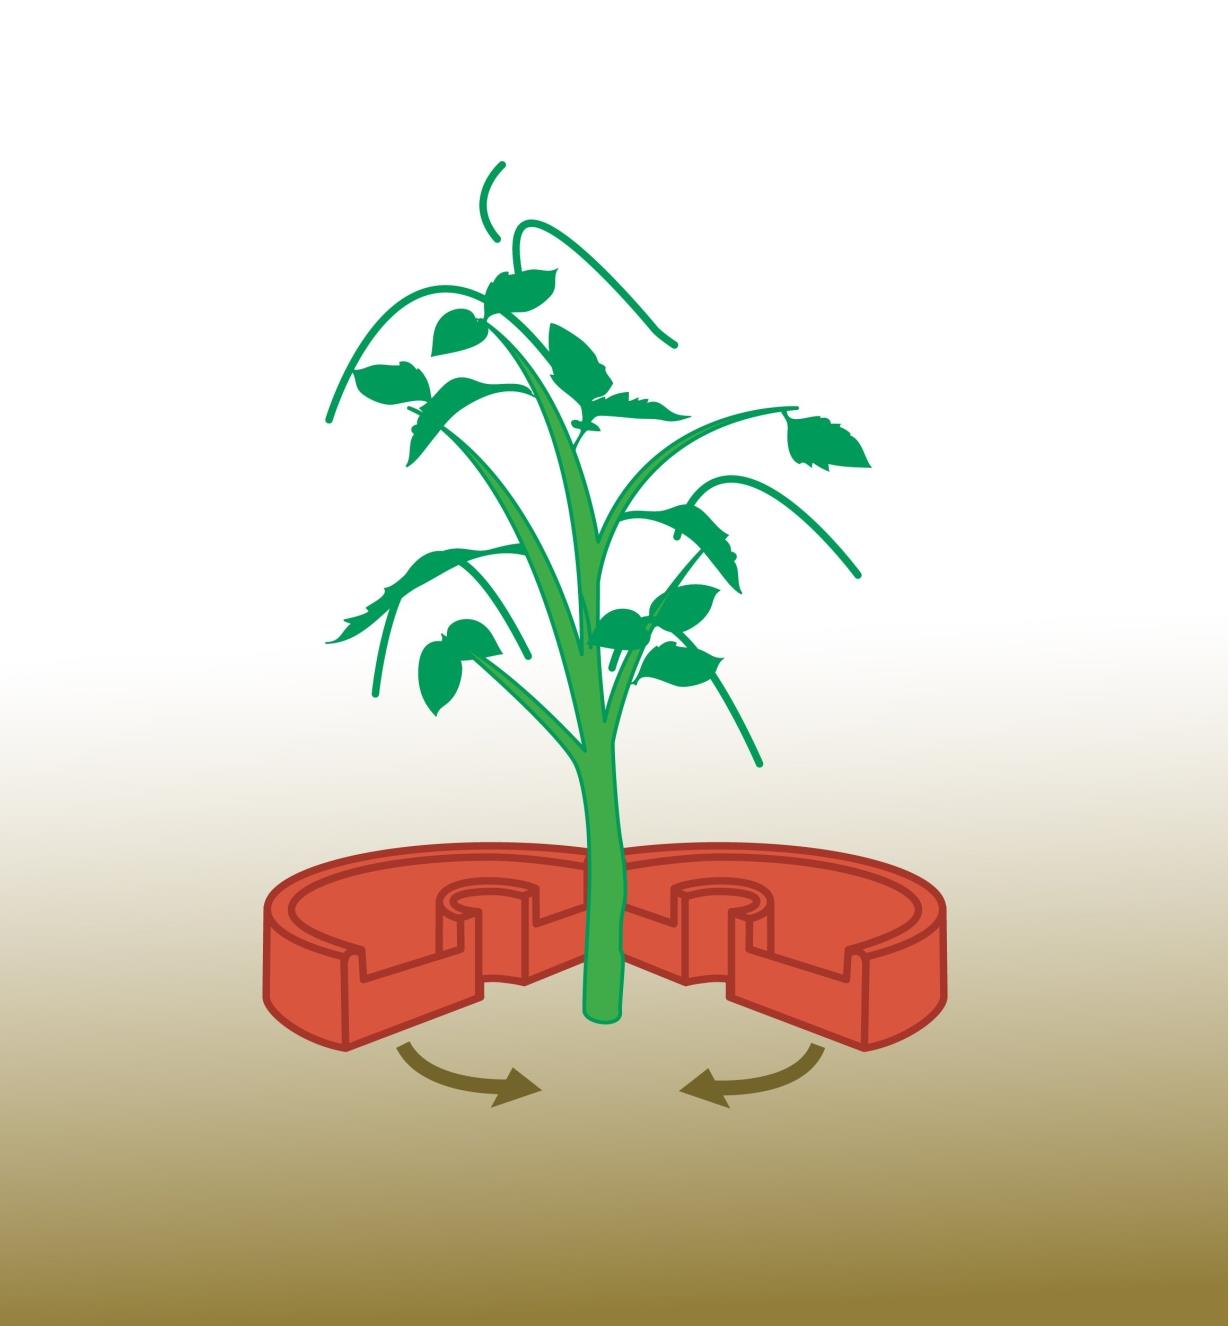 Illustration shows how to place Tomato Crater around a plant stem